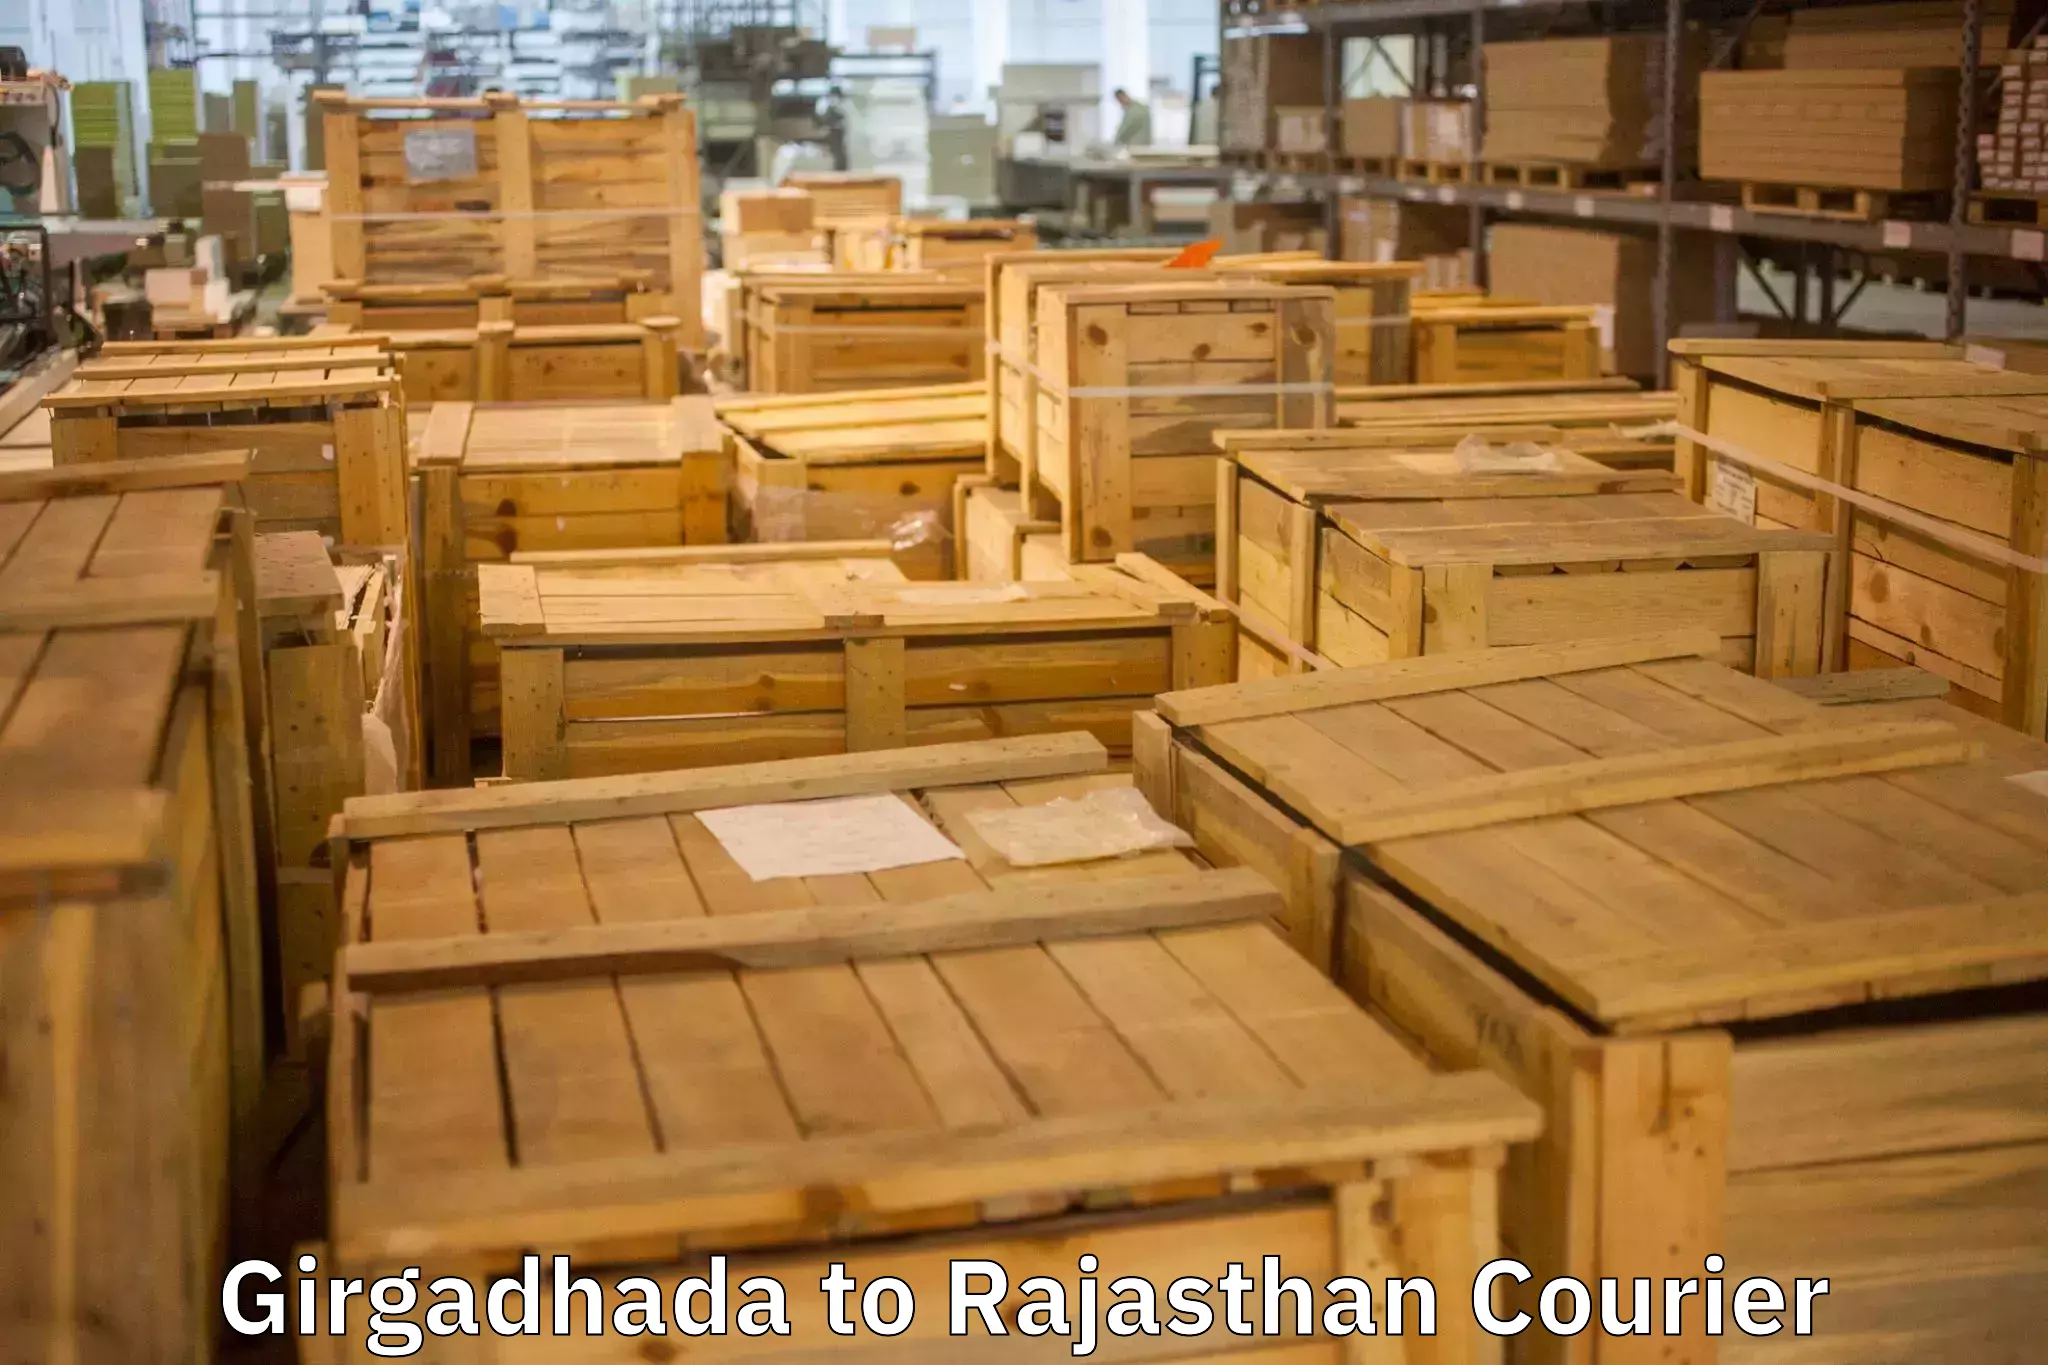 Dependable moving services in Girgadhada to Gotan